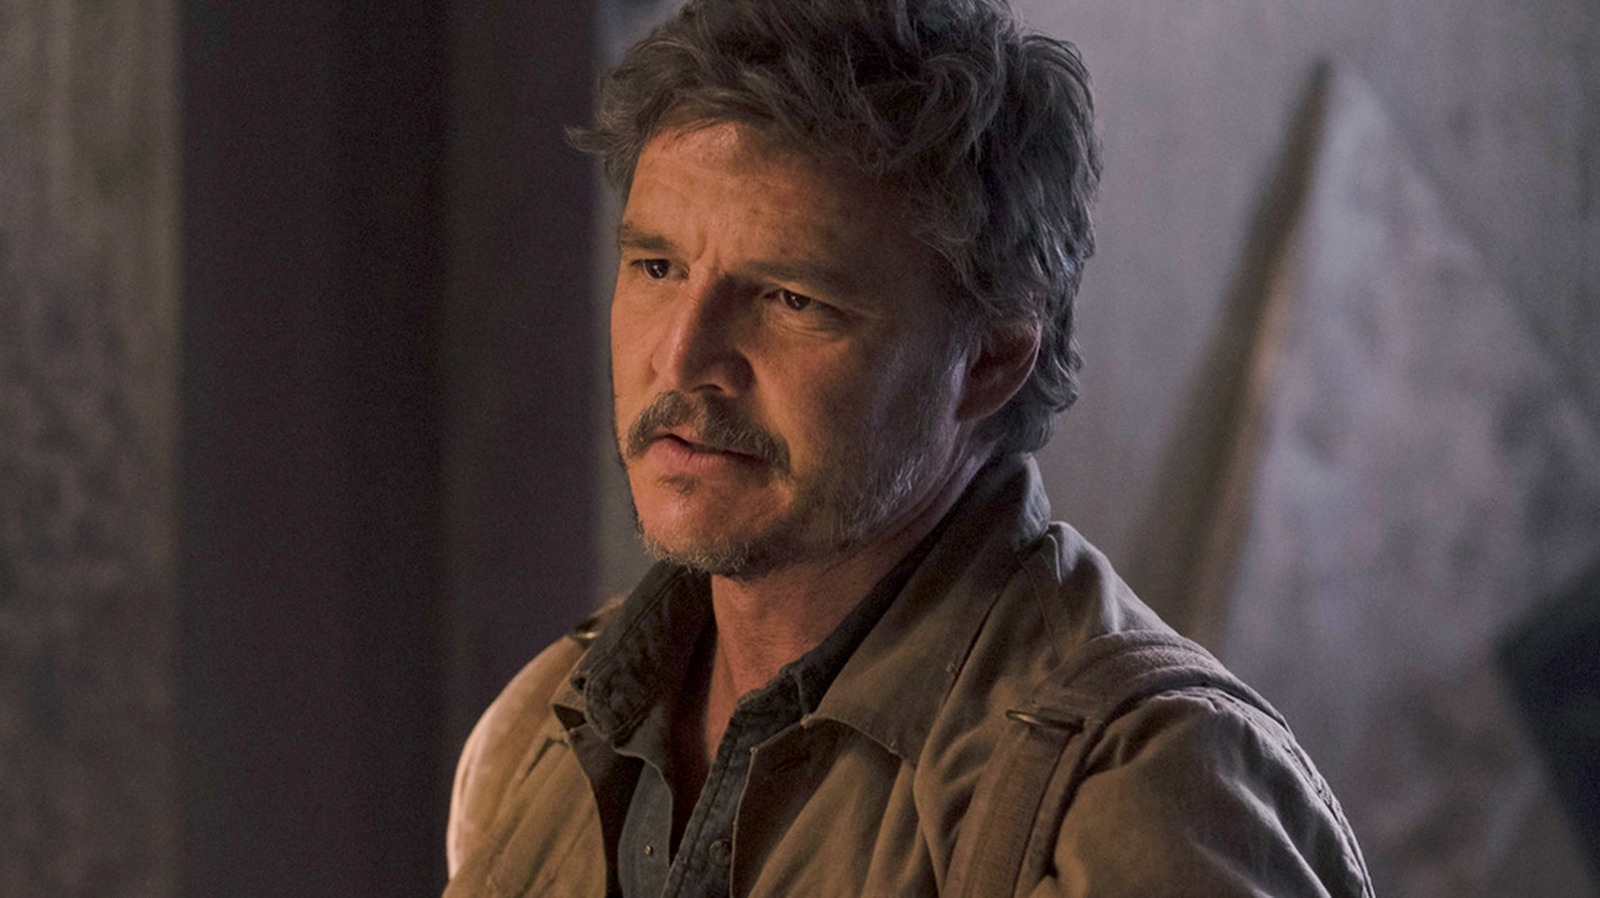 Pedro Pascal's Last of Us Series Will Have Major Changes From